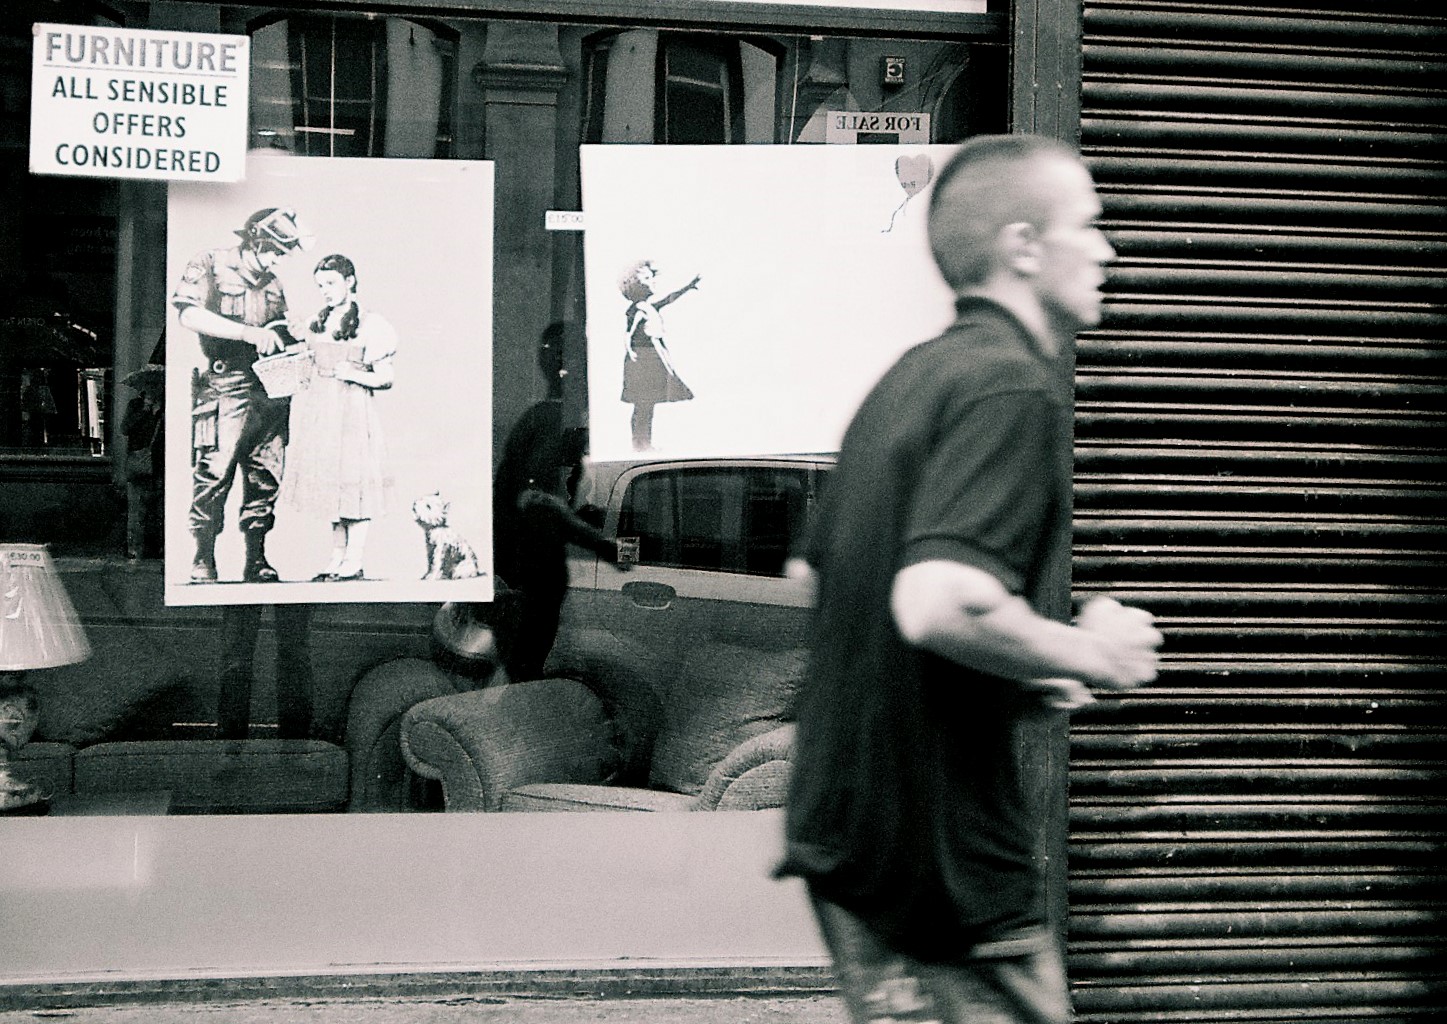 Louder Than Words: Why Is Banksy Protest Silent?